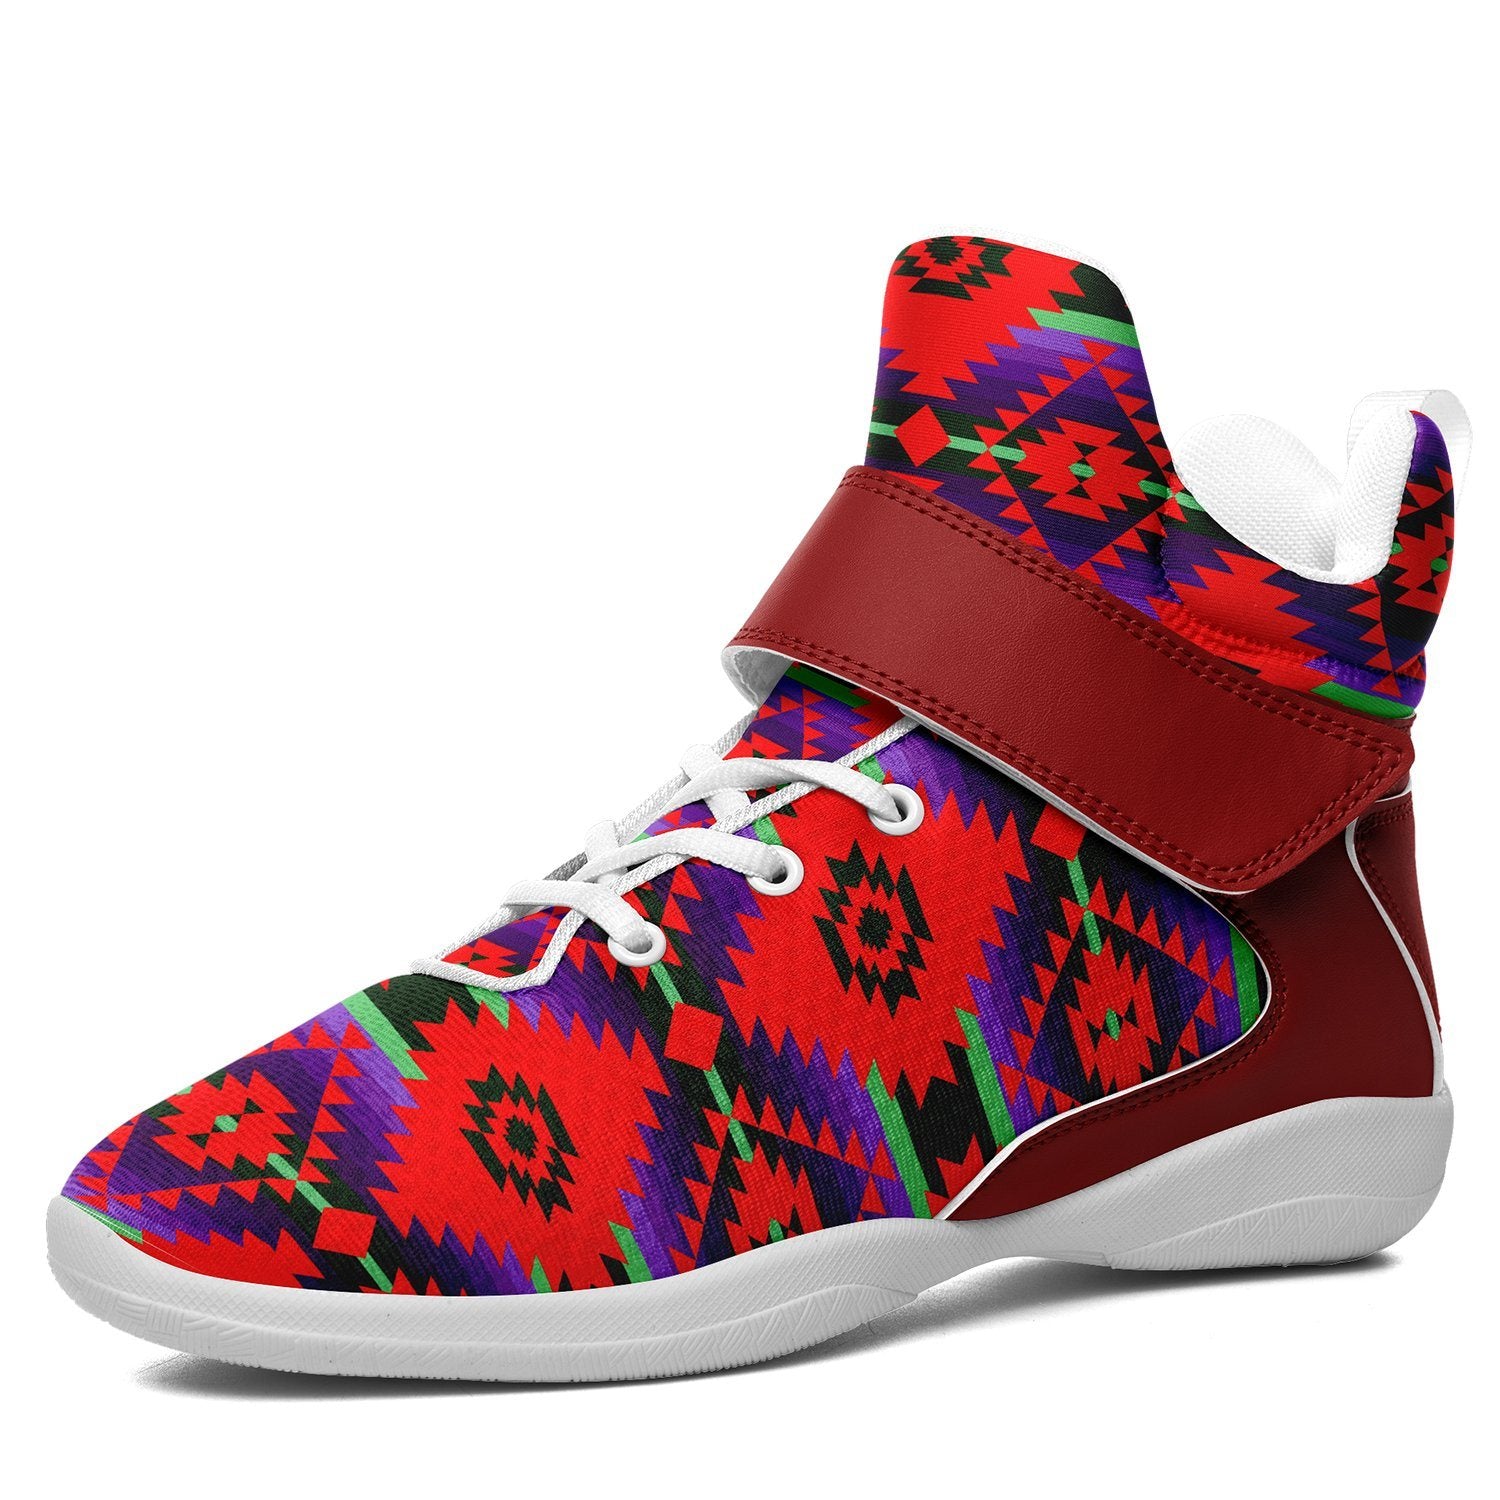 Cree Confederacy Chicken Dance Ipottaa Basketball / Sport High Top Shoes 49 Dzine US Women 4.5 / US Youth 3.5 / EUR 35 White Sole with Red Strap 